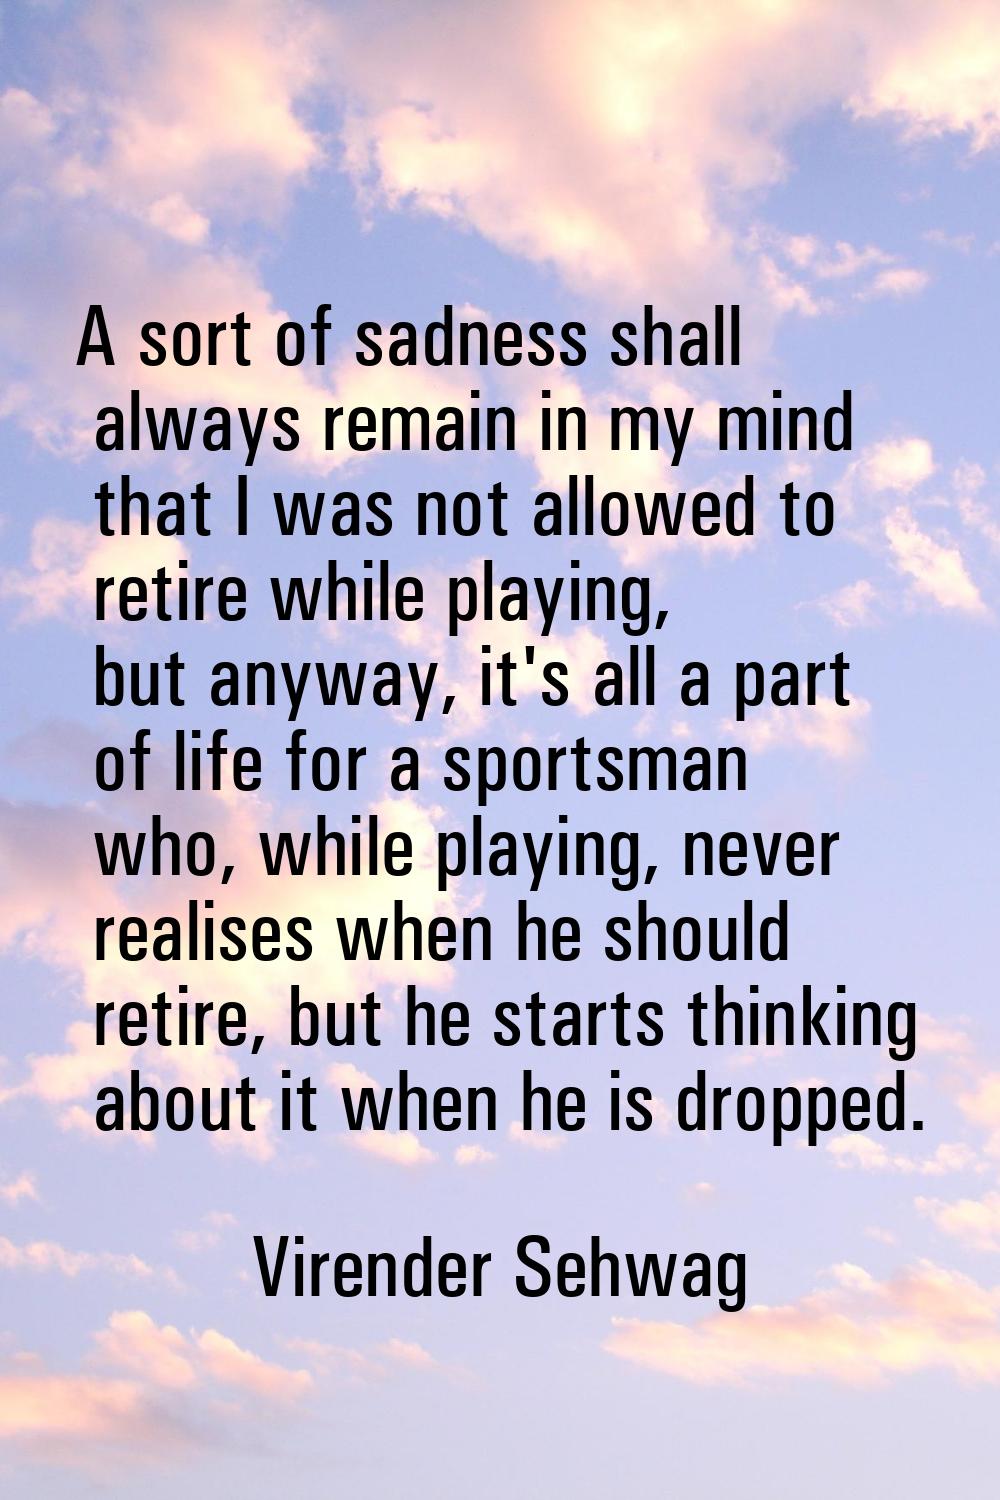 A sort of sadness shall always remain in my mind that I was not allowed to retire while playing, bu